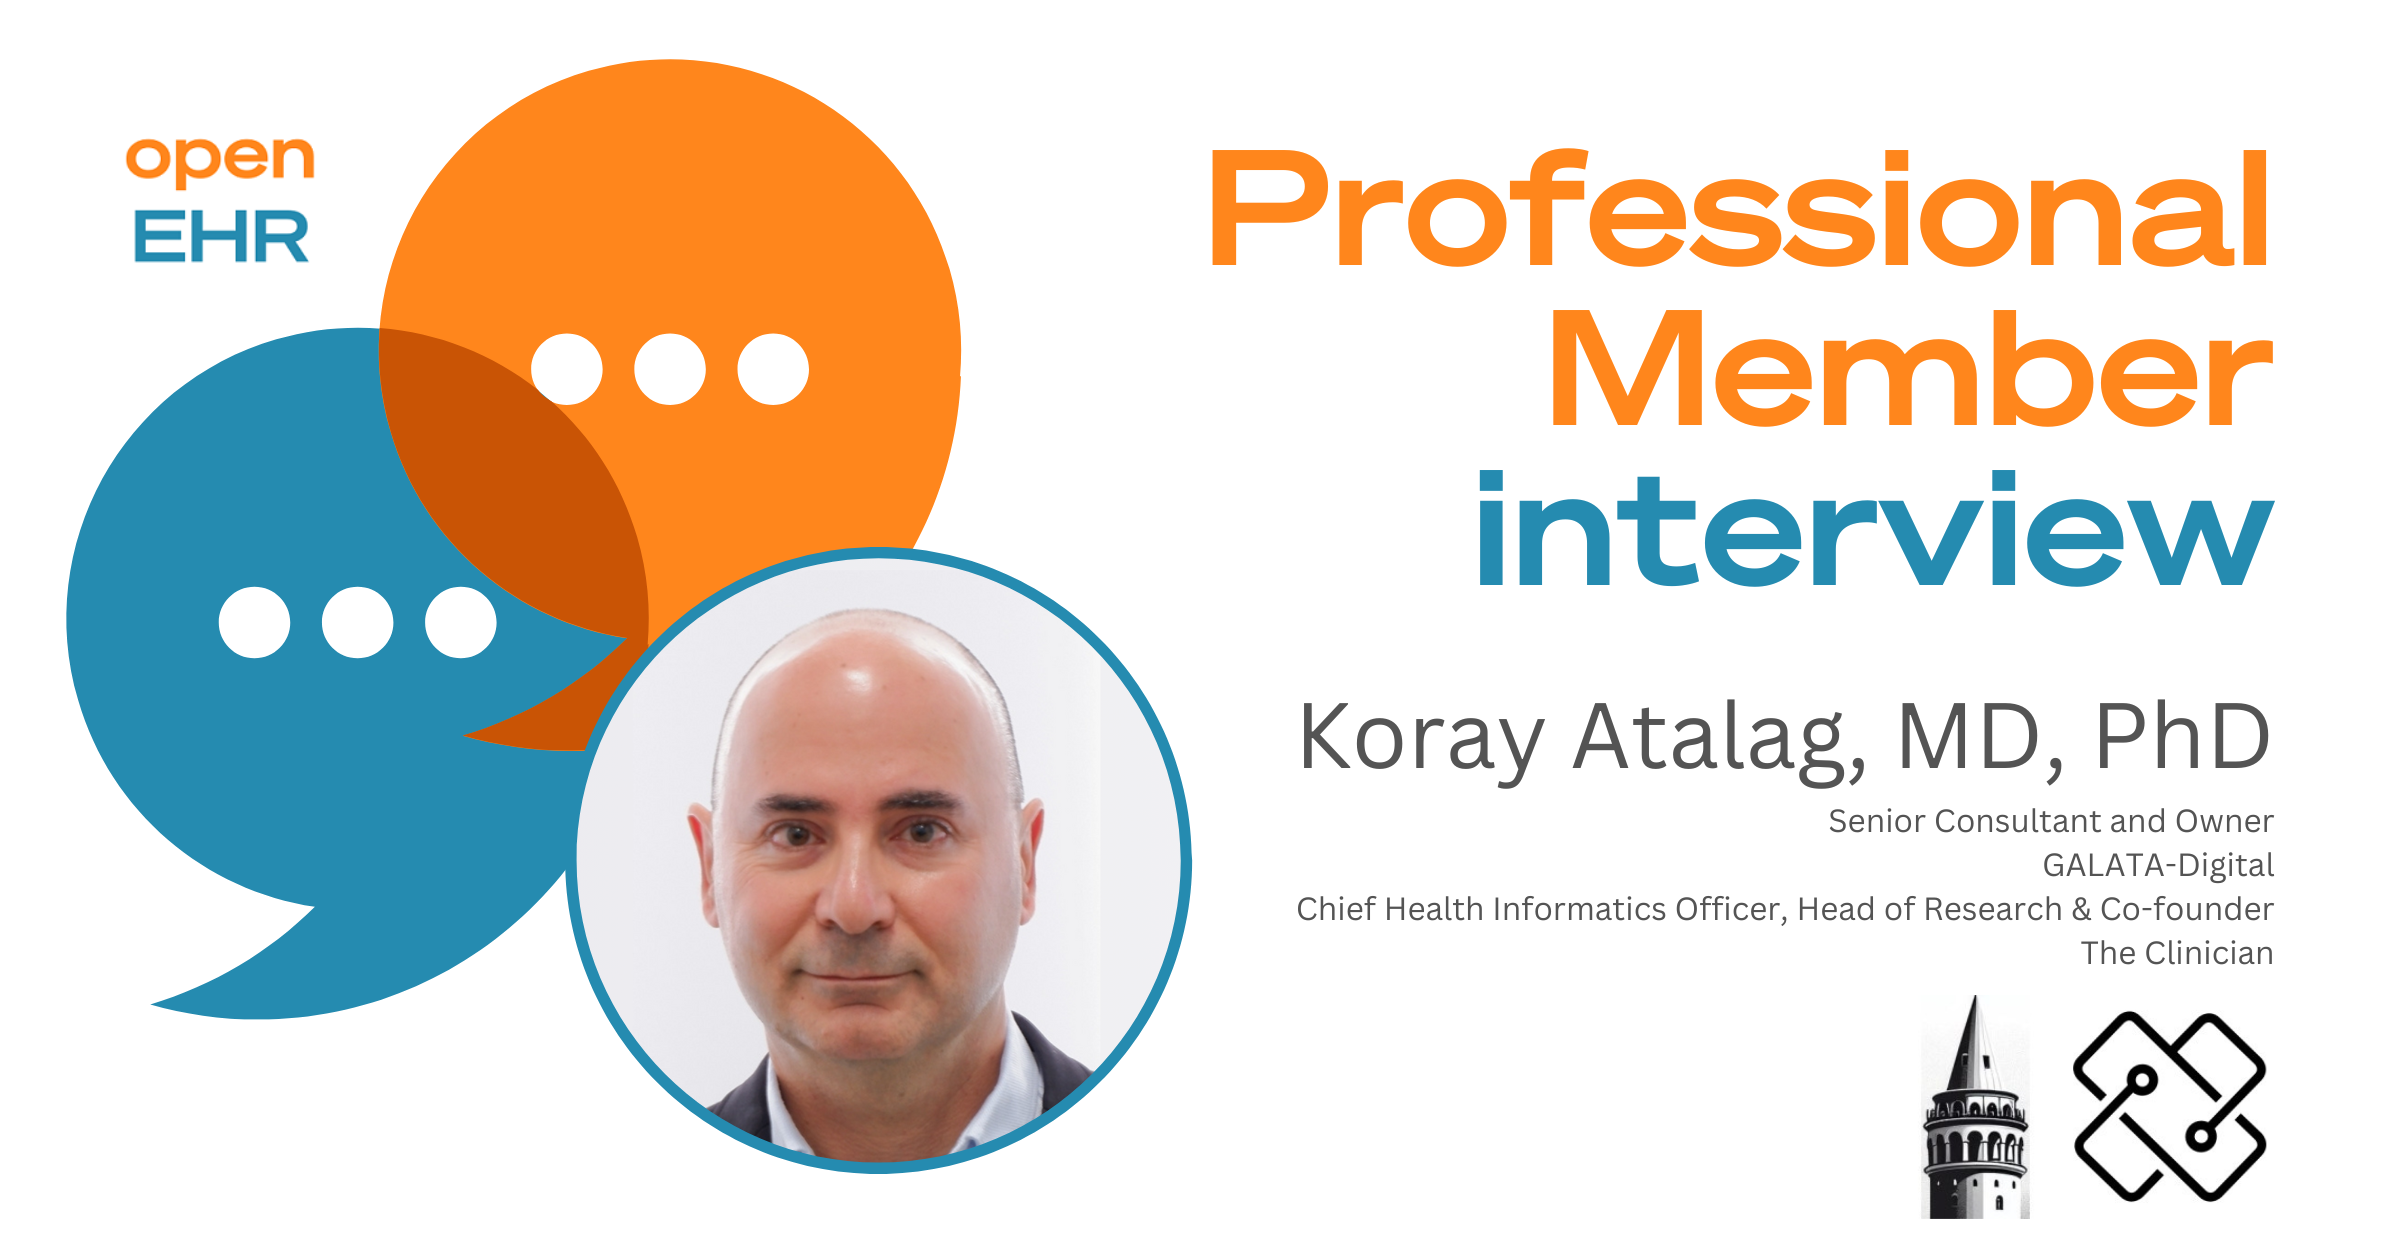 openEHR professional member, Koray Atalag talks about his journey into openEHR